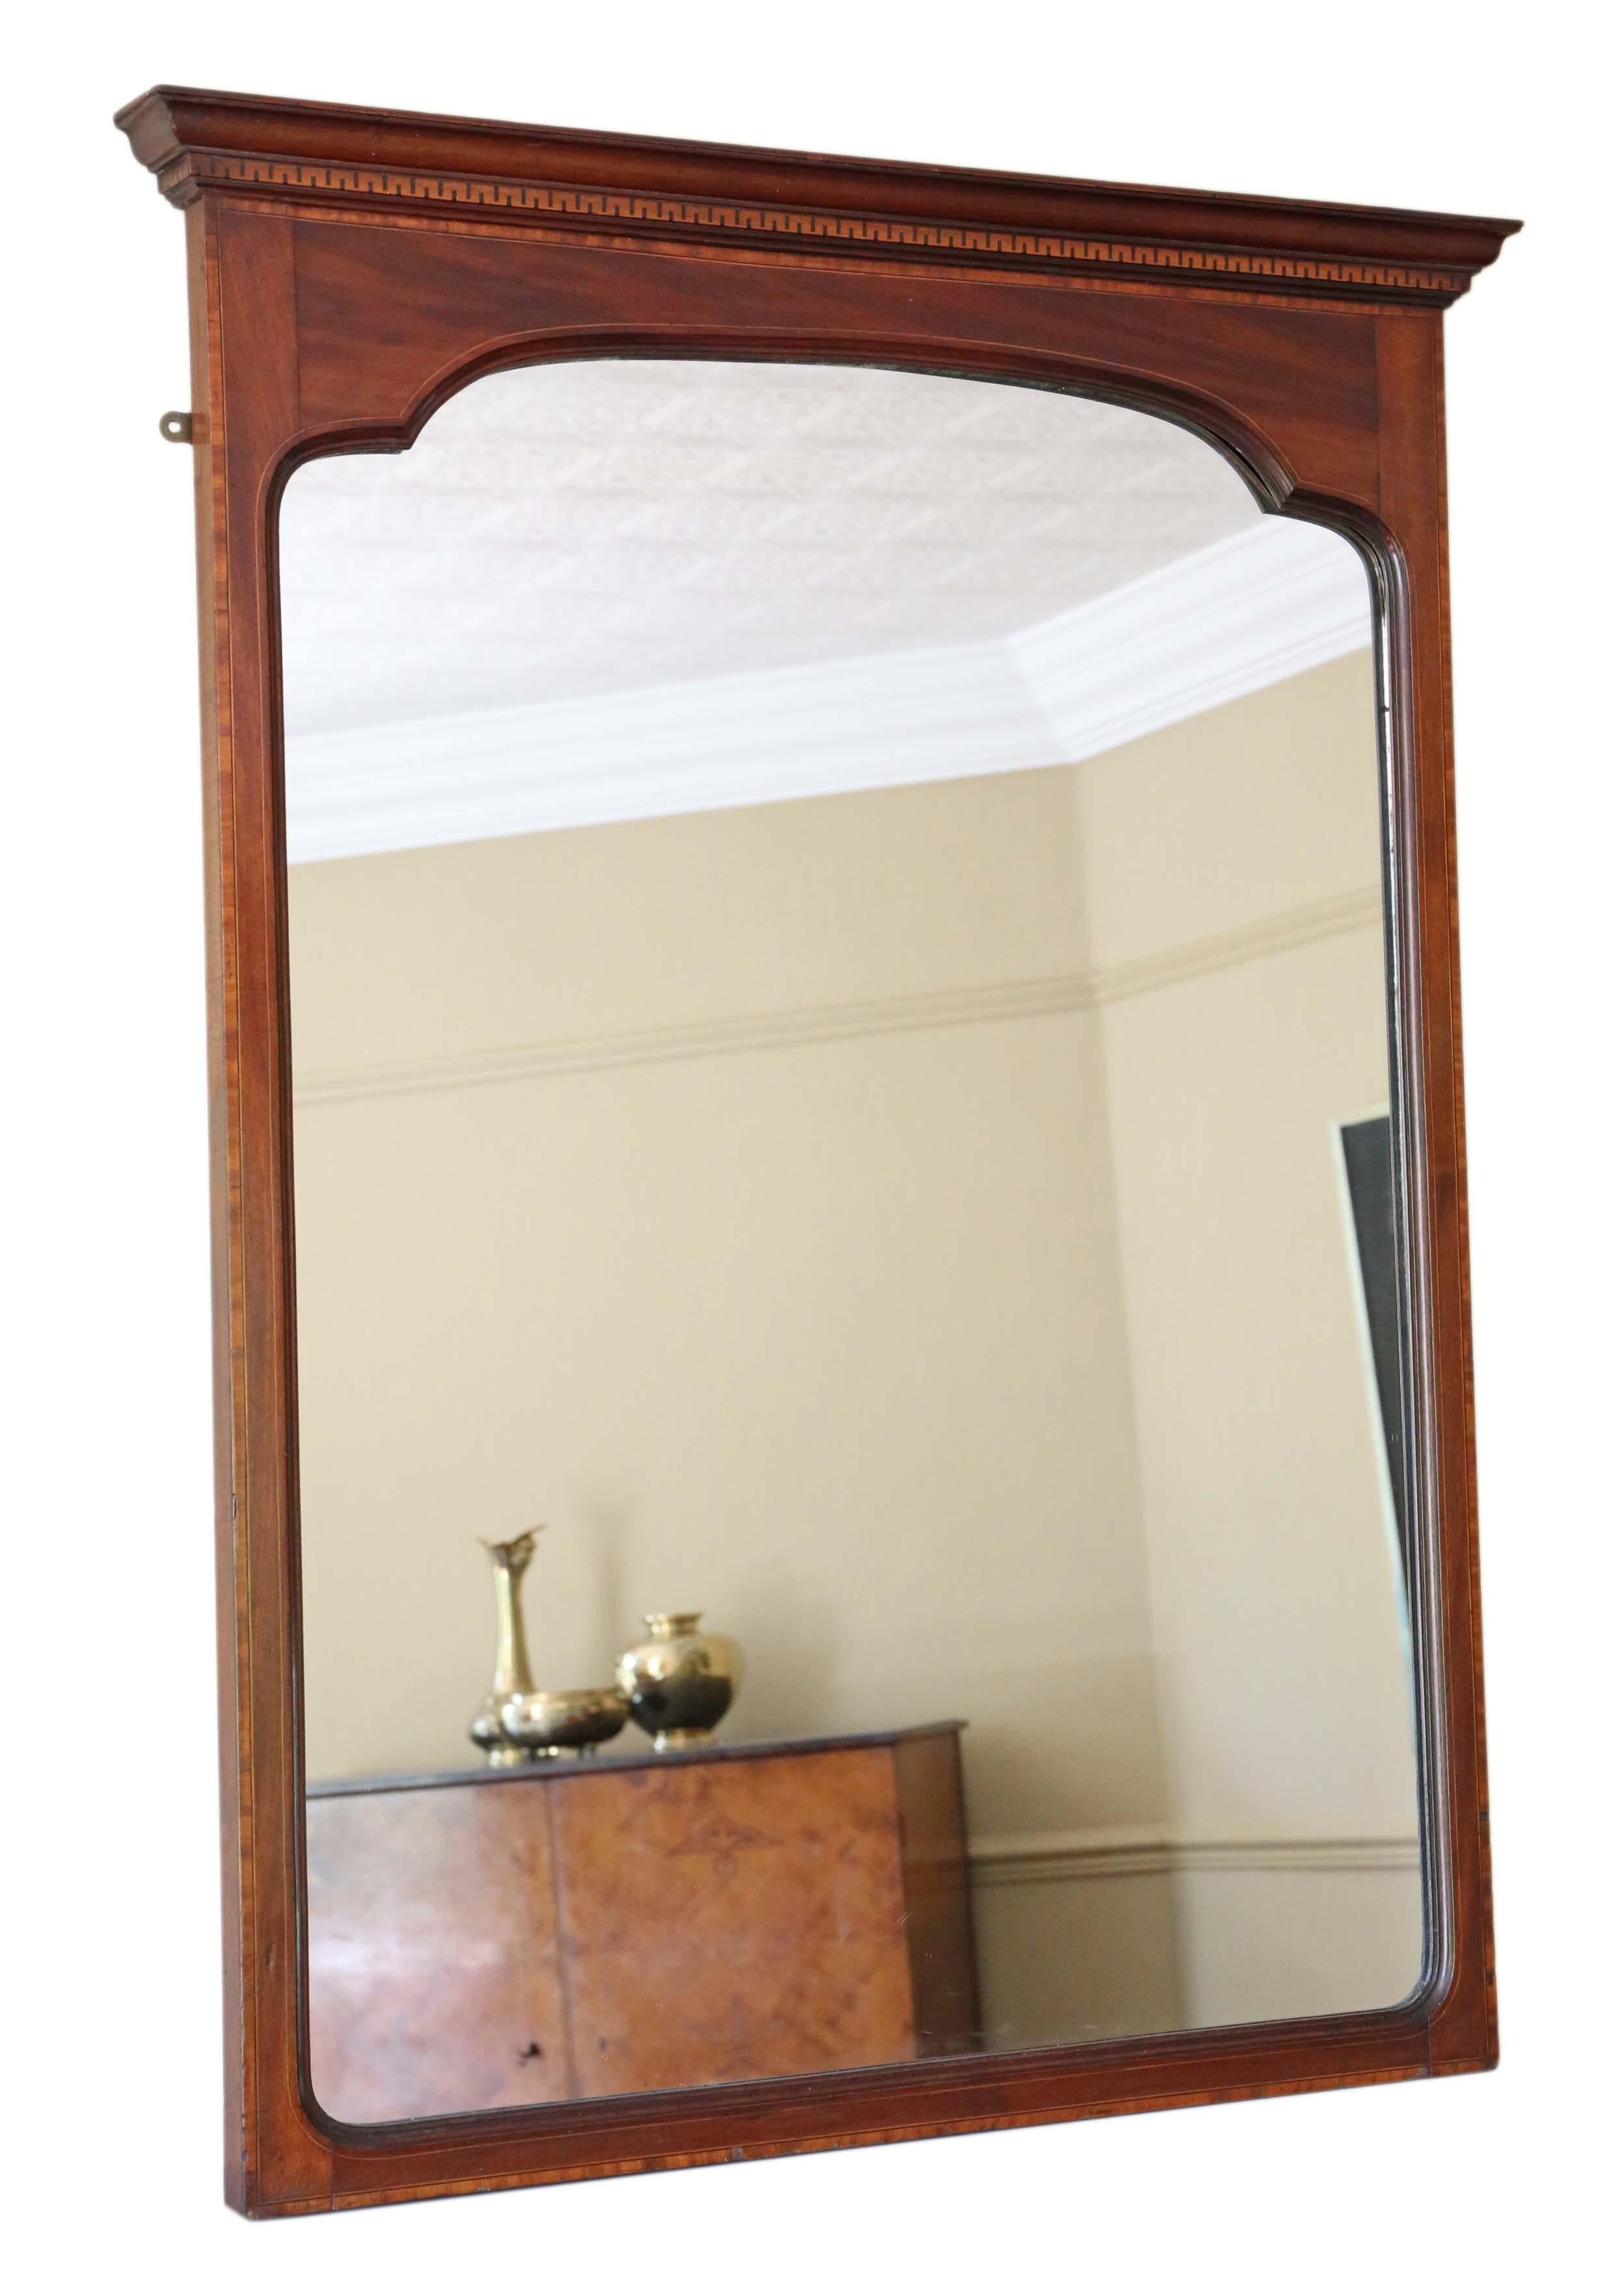 Antique large quality Edwardian inlaid mahogany wall mirror, circa 1905.
Would look amazing in the right location. No woodworm or loose joints.
The original glass is in very good condition with very light oxidation and other minor age related